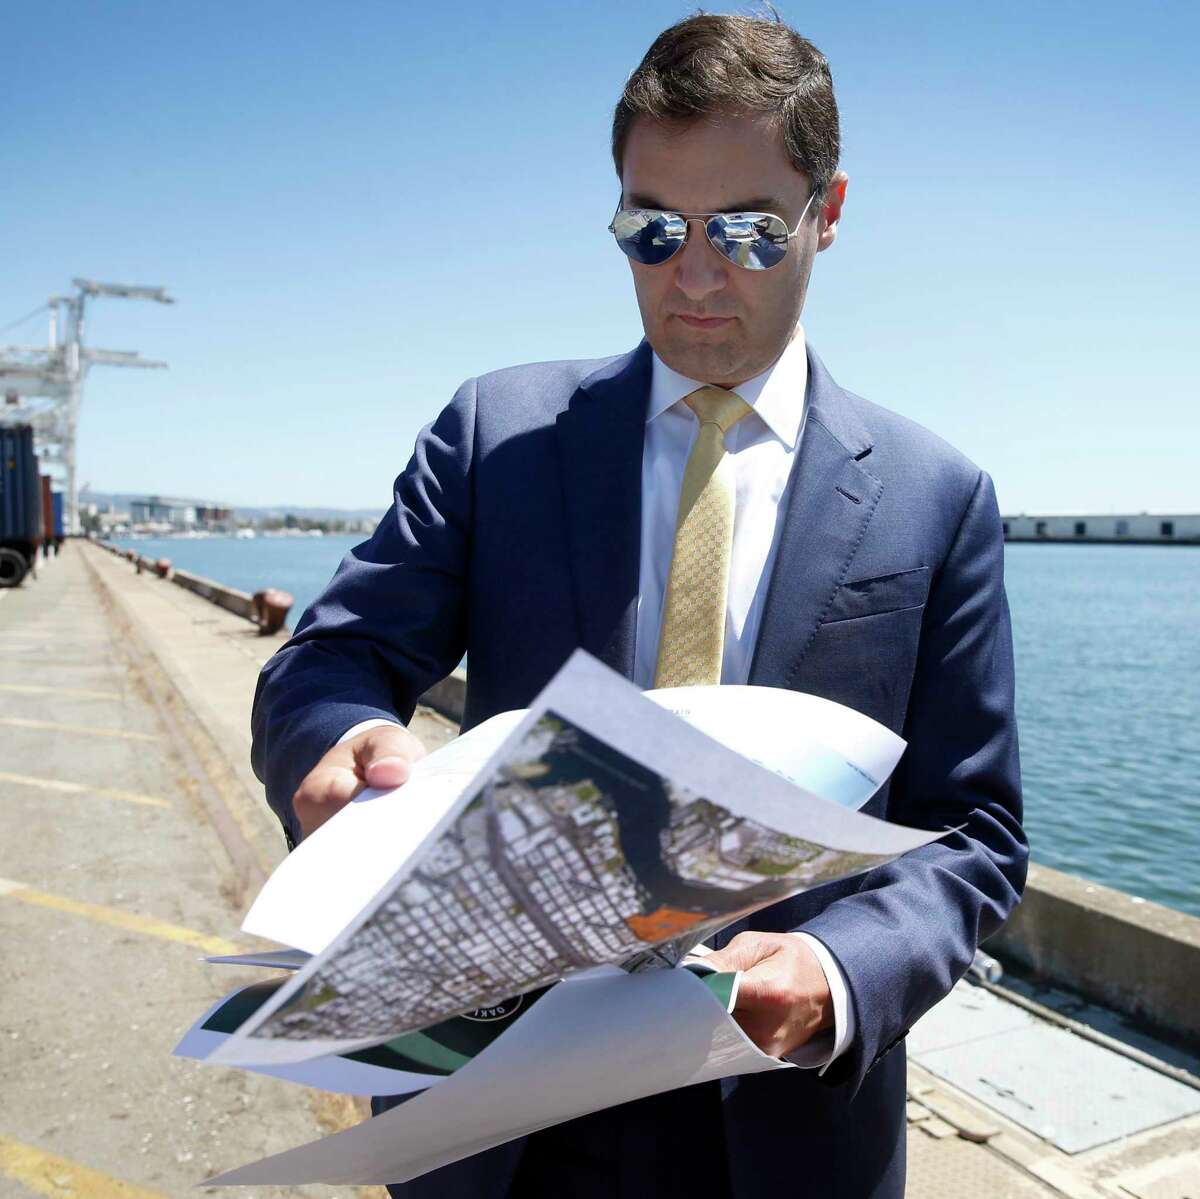 Oakland A's President Dave Kaval flips through renderings of the development plan while leading a private tour of the Howard Terminal site in Oakland, Calif. on Tuesday, Sept. 3, 2019 where the baseball team is hoping to build its new stadium.